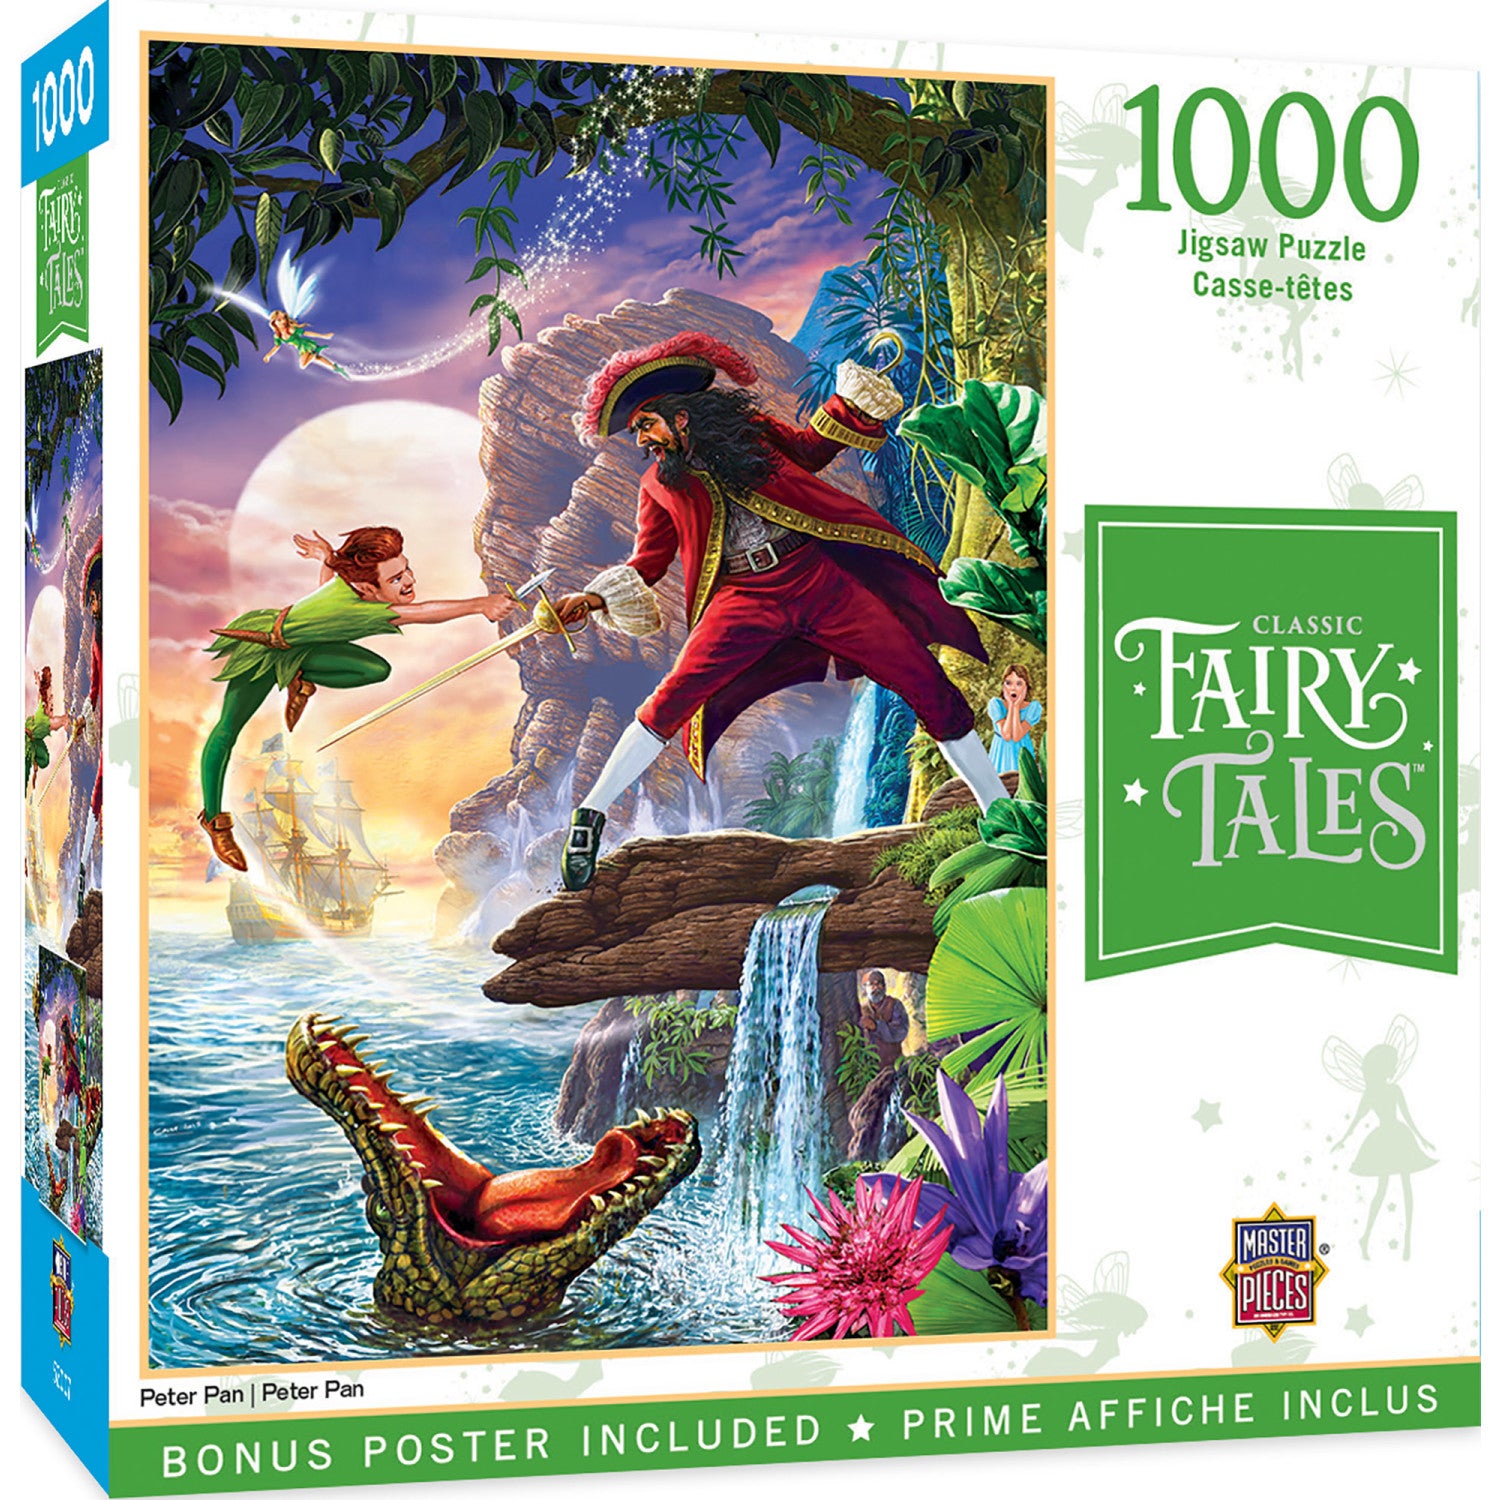 Classic Fairy Tales - Peter Pan 1000 Piece Puzzle